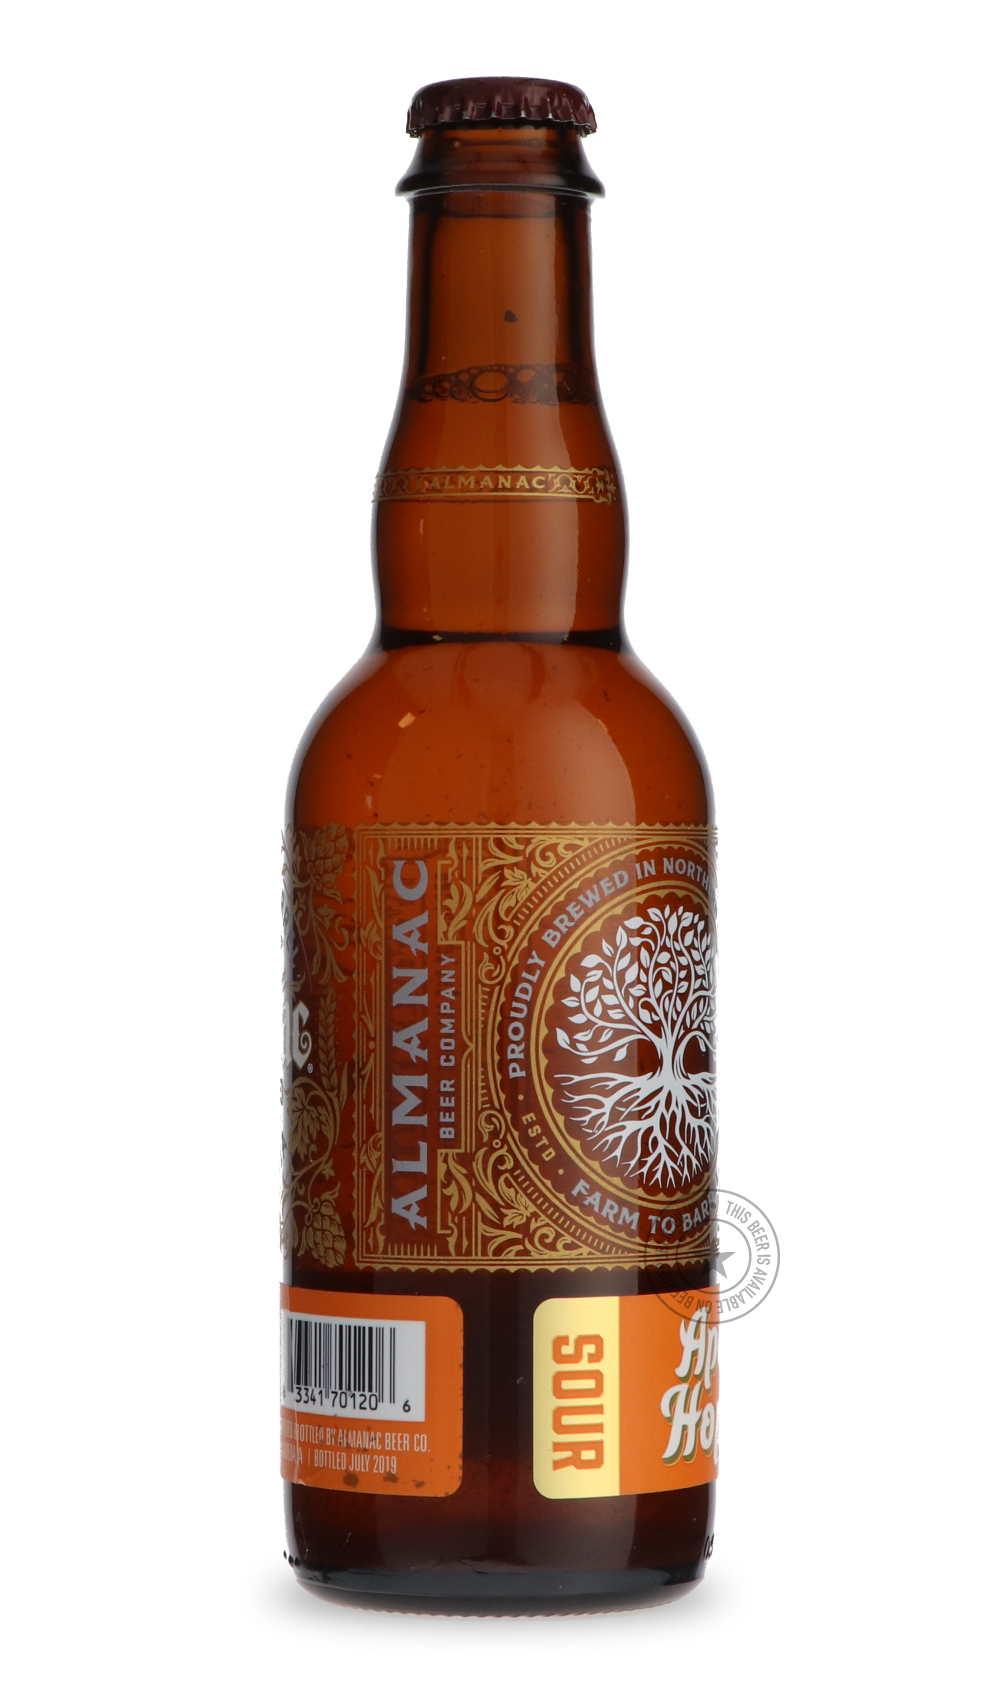 -Almanac- Apricot Hopcake-IPA- Only @ Beer Republic - The best online beer store for American & Canadian craft beer - Buy beer online from the USA and Canada - Bier online kopen - Amerikaans bier kopen - Craft beer store - Craft beer kopen - Amerikanisch bier kaufen - Bier online kaufen - Acheter biere online - IPA - Stout - Porter - New England IPA - Hazy IPA - Imperial Stout - Barrel Aged - Barrel Aged Imperial Stout - Brown - Dark beer - Blond - Blonde - Pilsner - Lager - Wheat - Weizen - Amber - Barley 